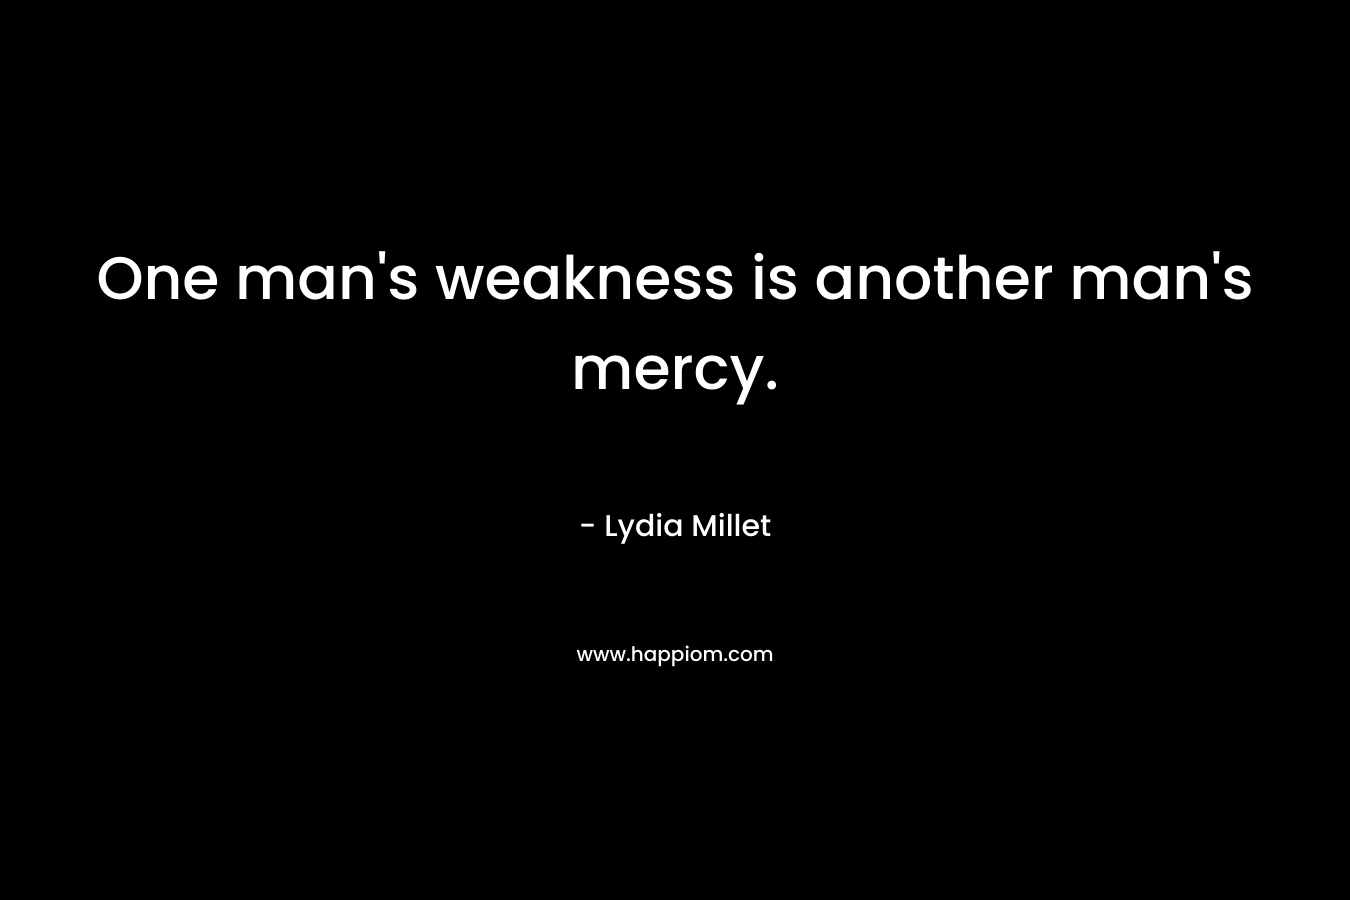 One man's weakness is another man's mercy.